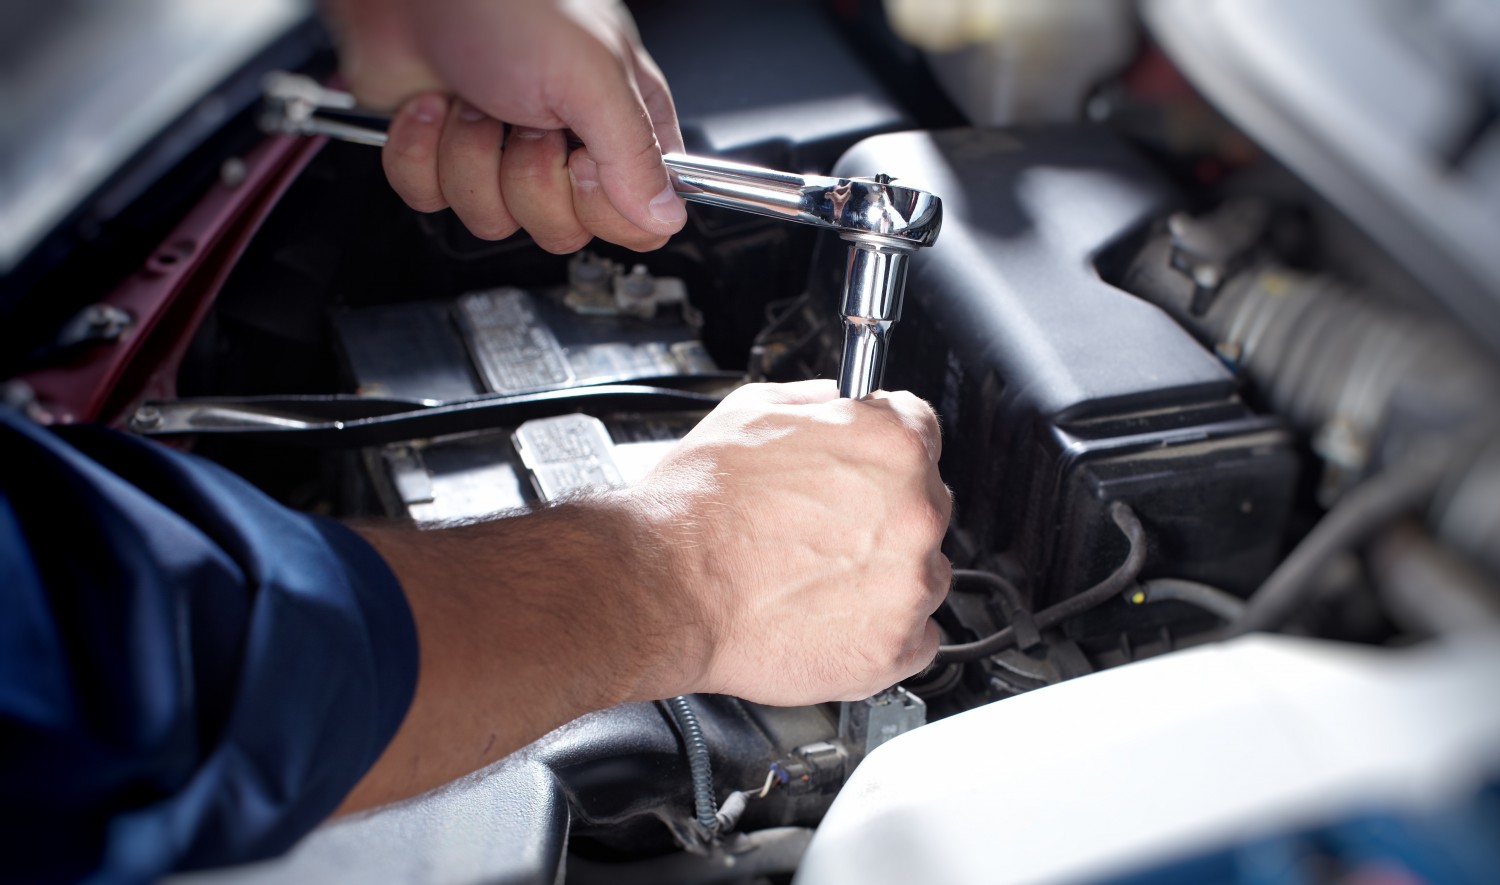 Don't Just Take The Mechanics Word About Your Auto Repairs. - A W Peller